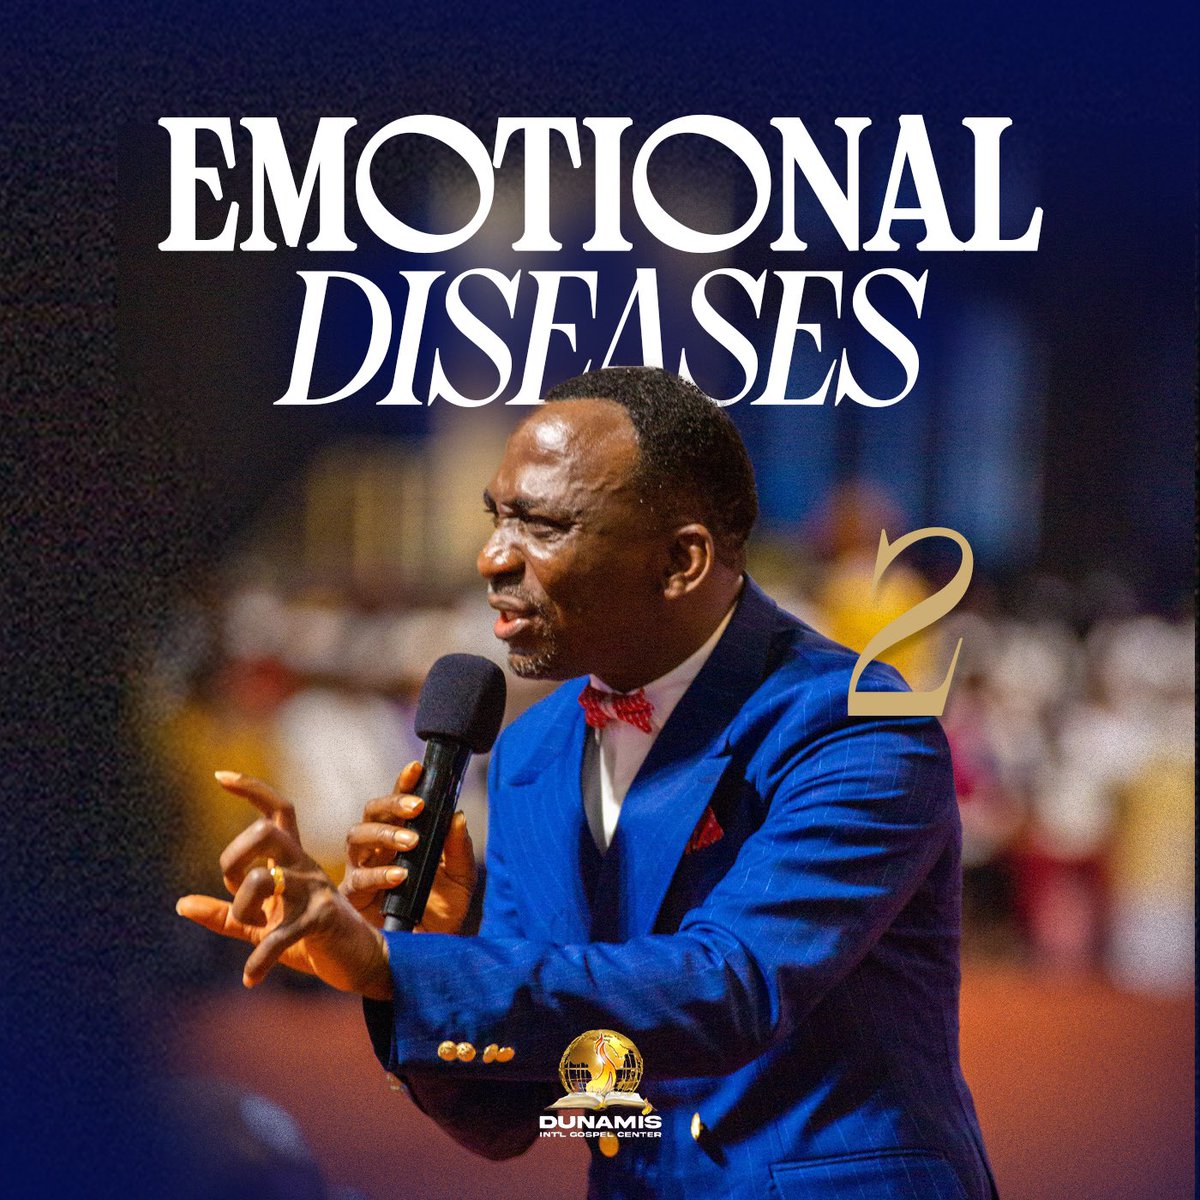 Emotional diseases Part 2 is now available on my YouTube. #message #video #emotional #diseases